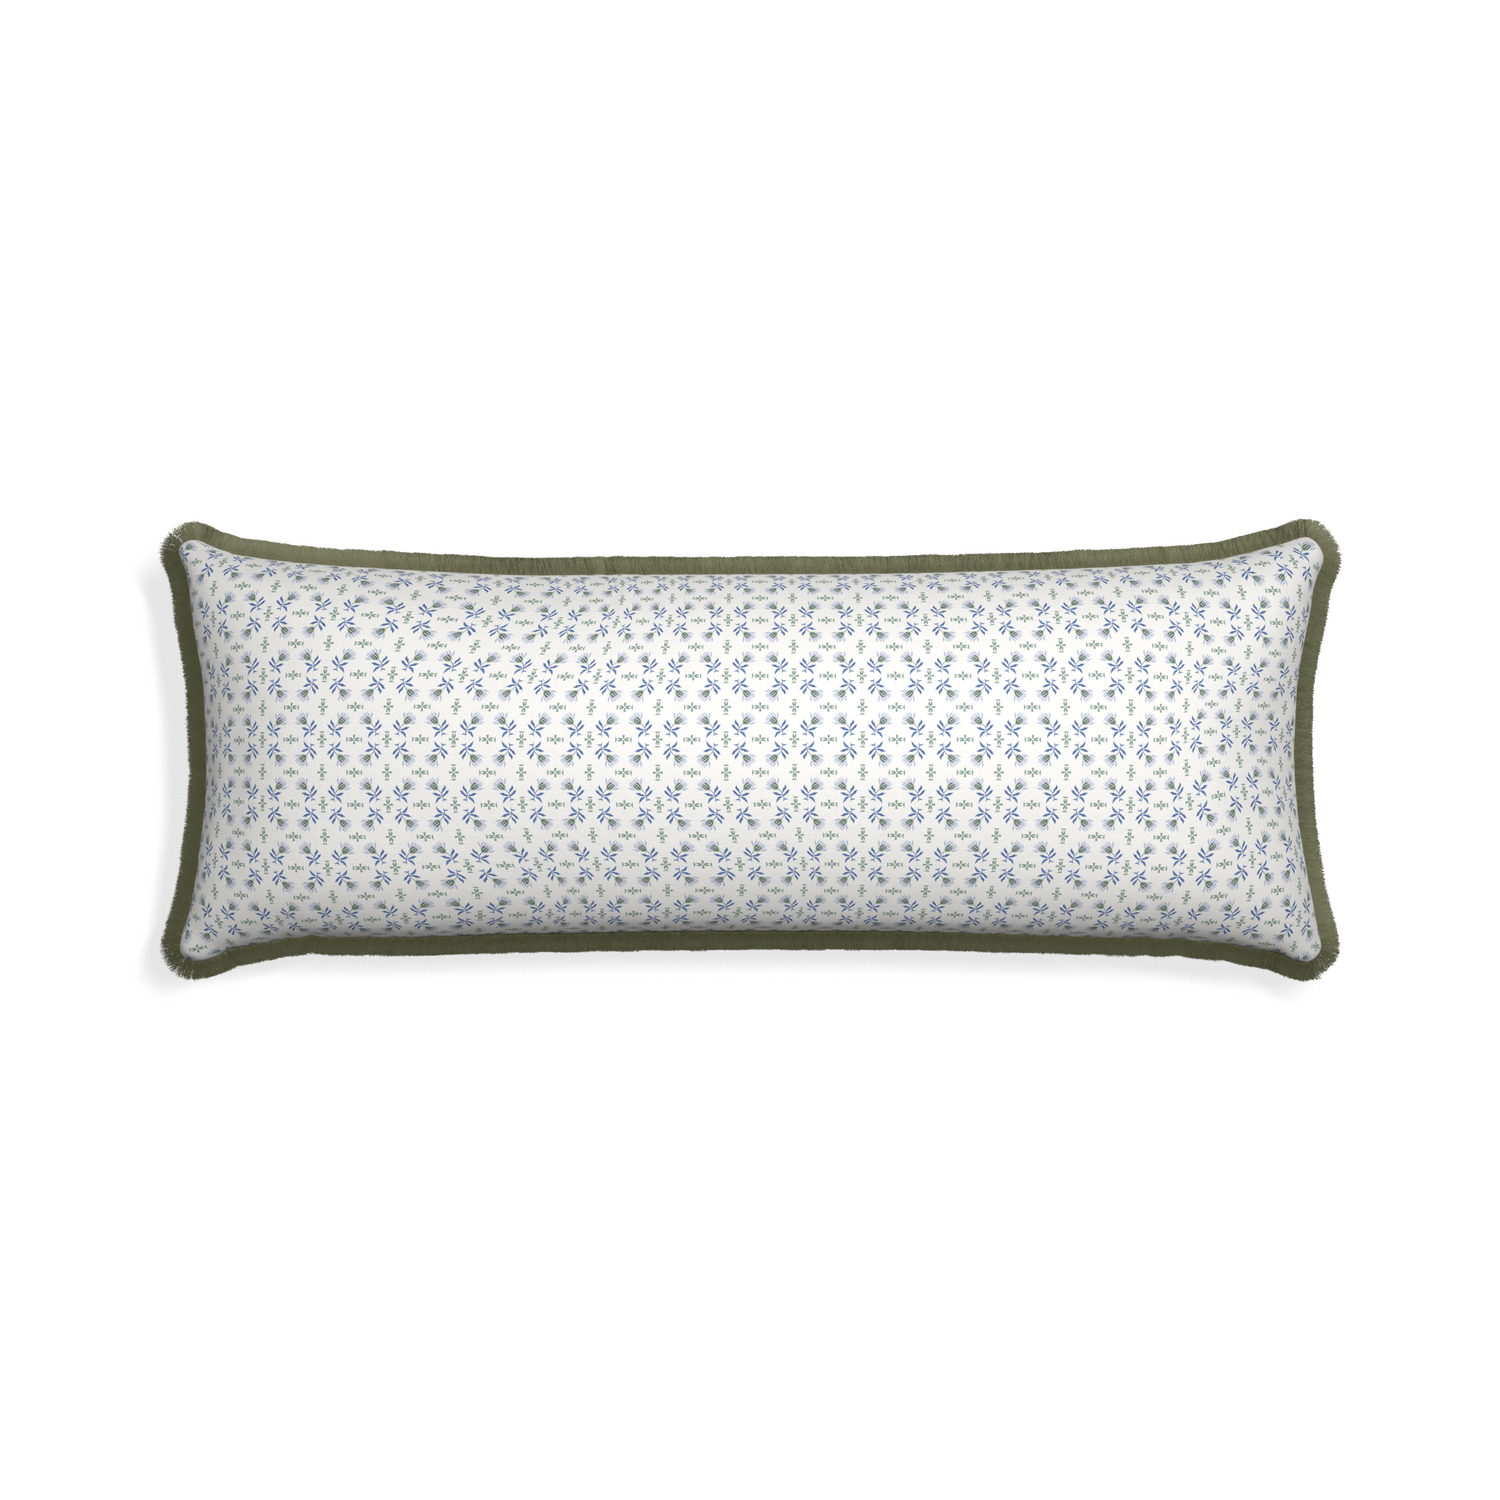 Xl-lumbar lee custom blue & green floralpillow with sage fringe on white background